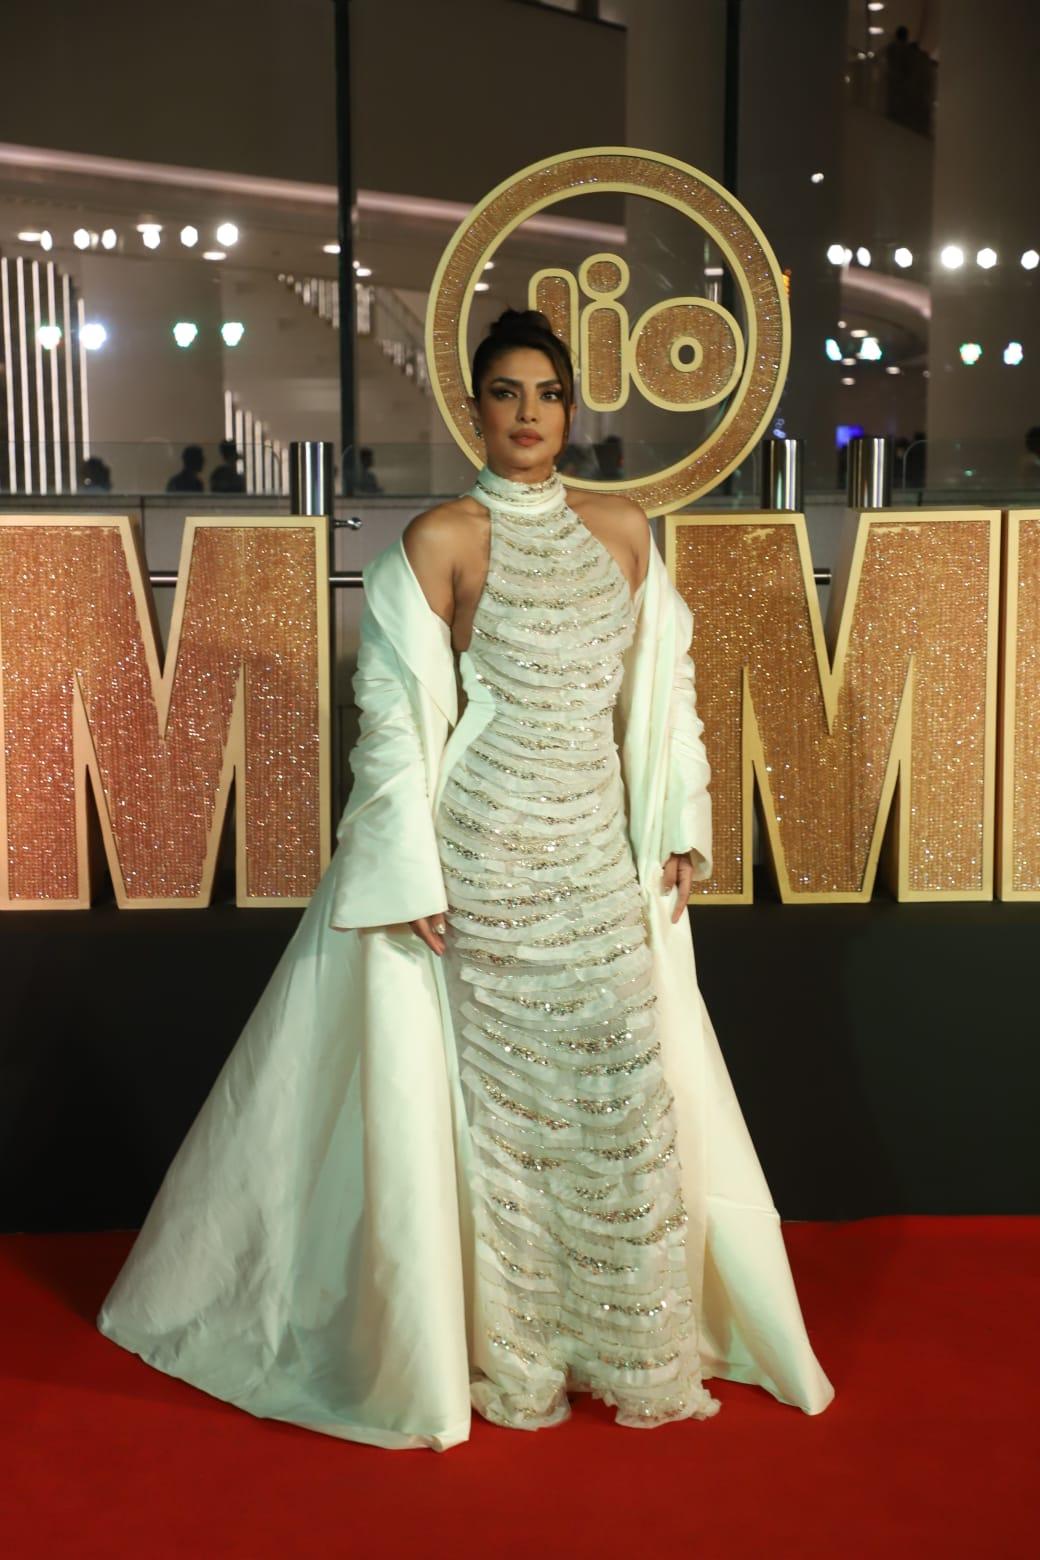 Priyanka Chopra flew to India to attend the Jio MAMI event. The actress donned a pristine white dress